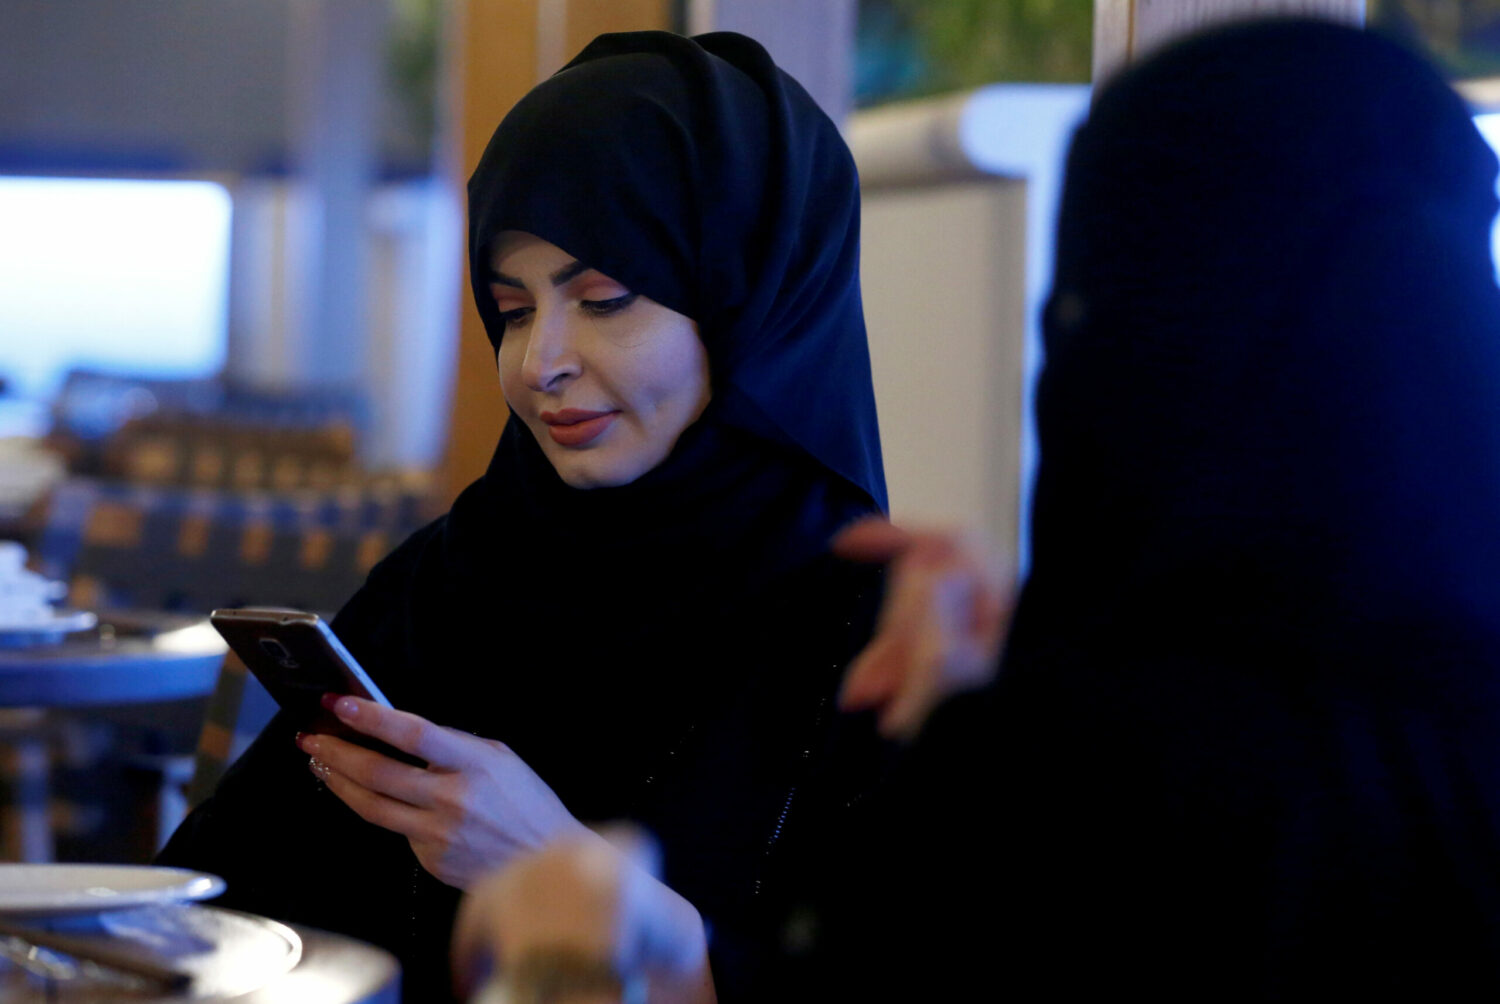 A woman uses her mobile phone in a cafe in Riyadh, Saudi Arabia October 6, 2016. (REUTERS/Faisal Al Nasser)